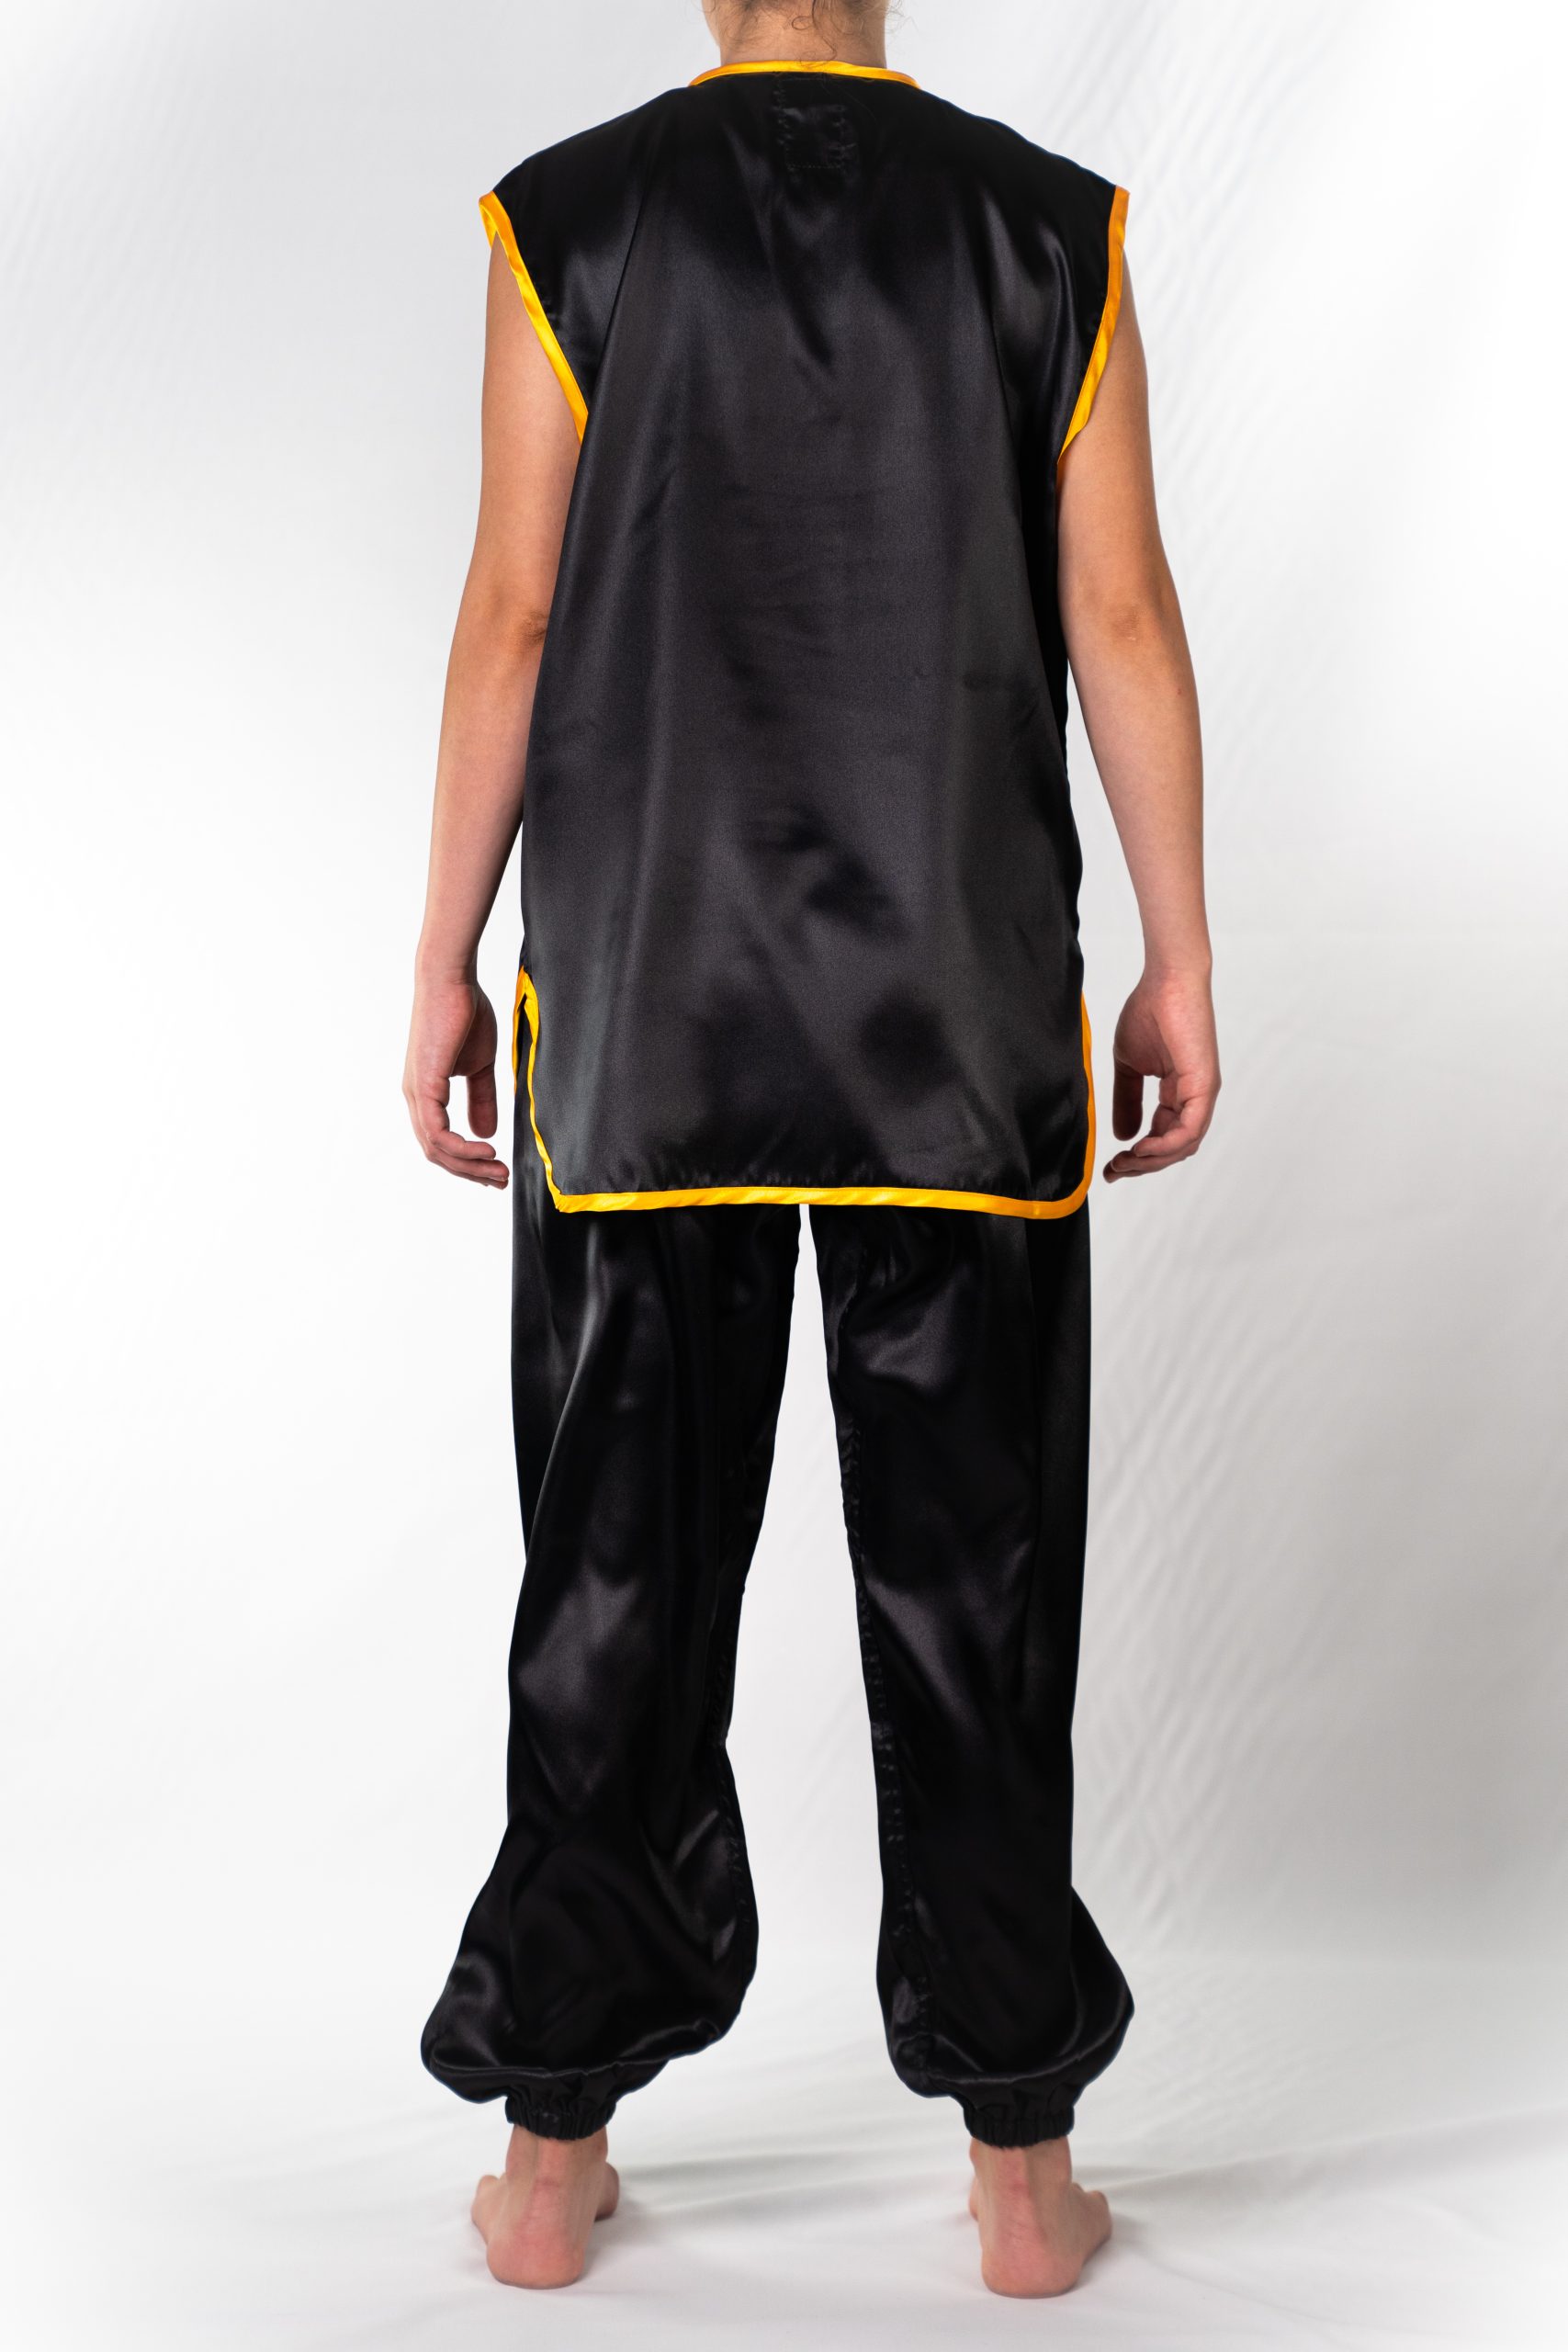 Kung Fu Uniforms&Suits for Sale | Best Chinese Clothing